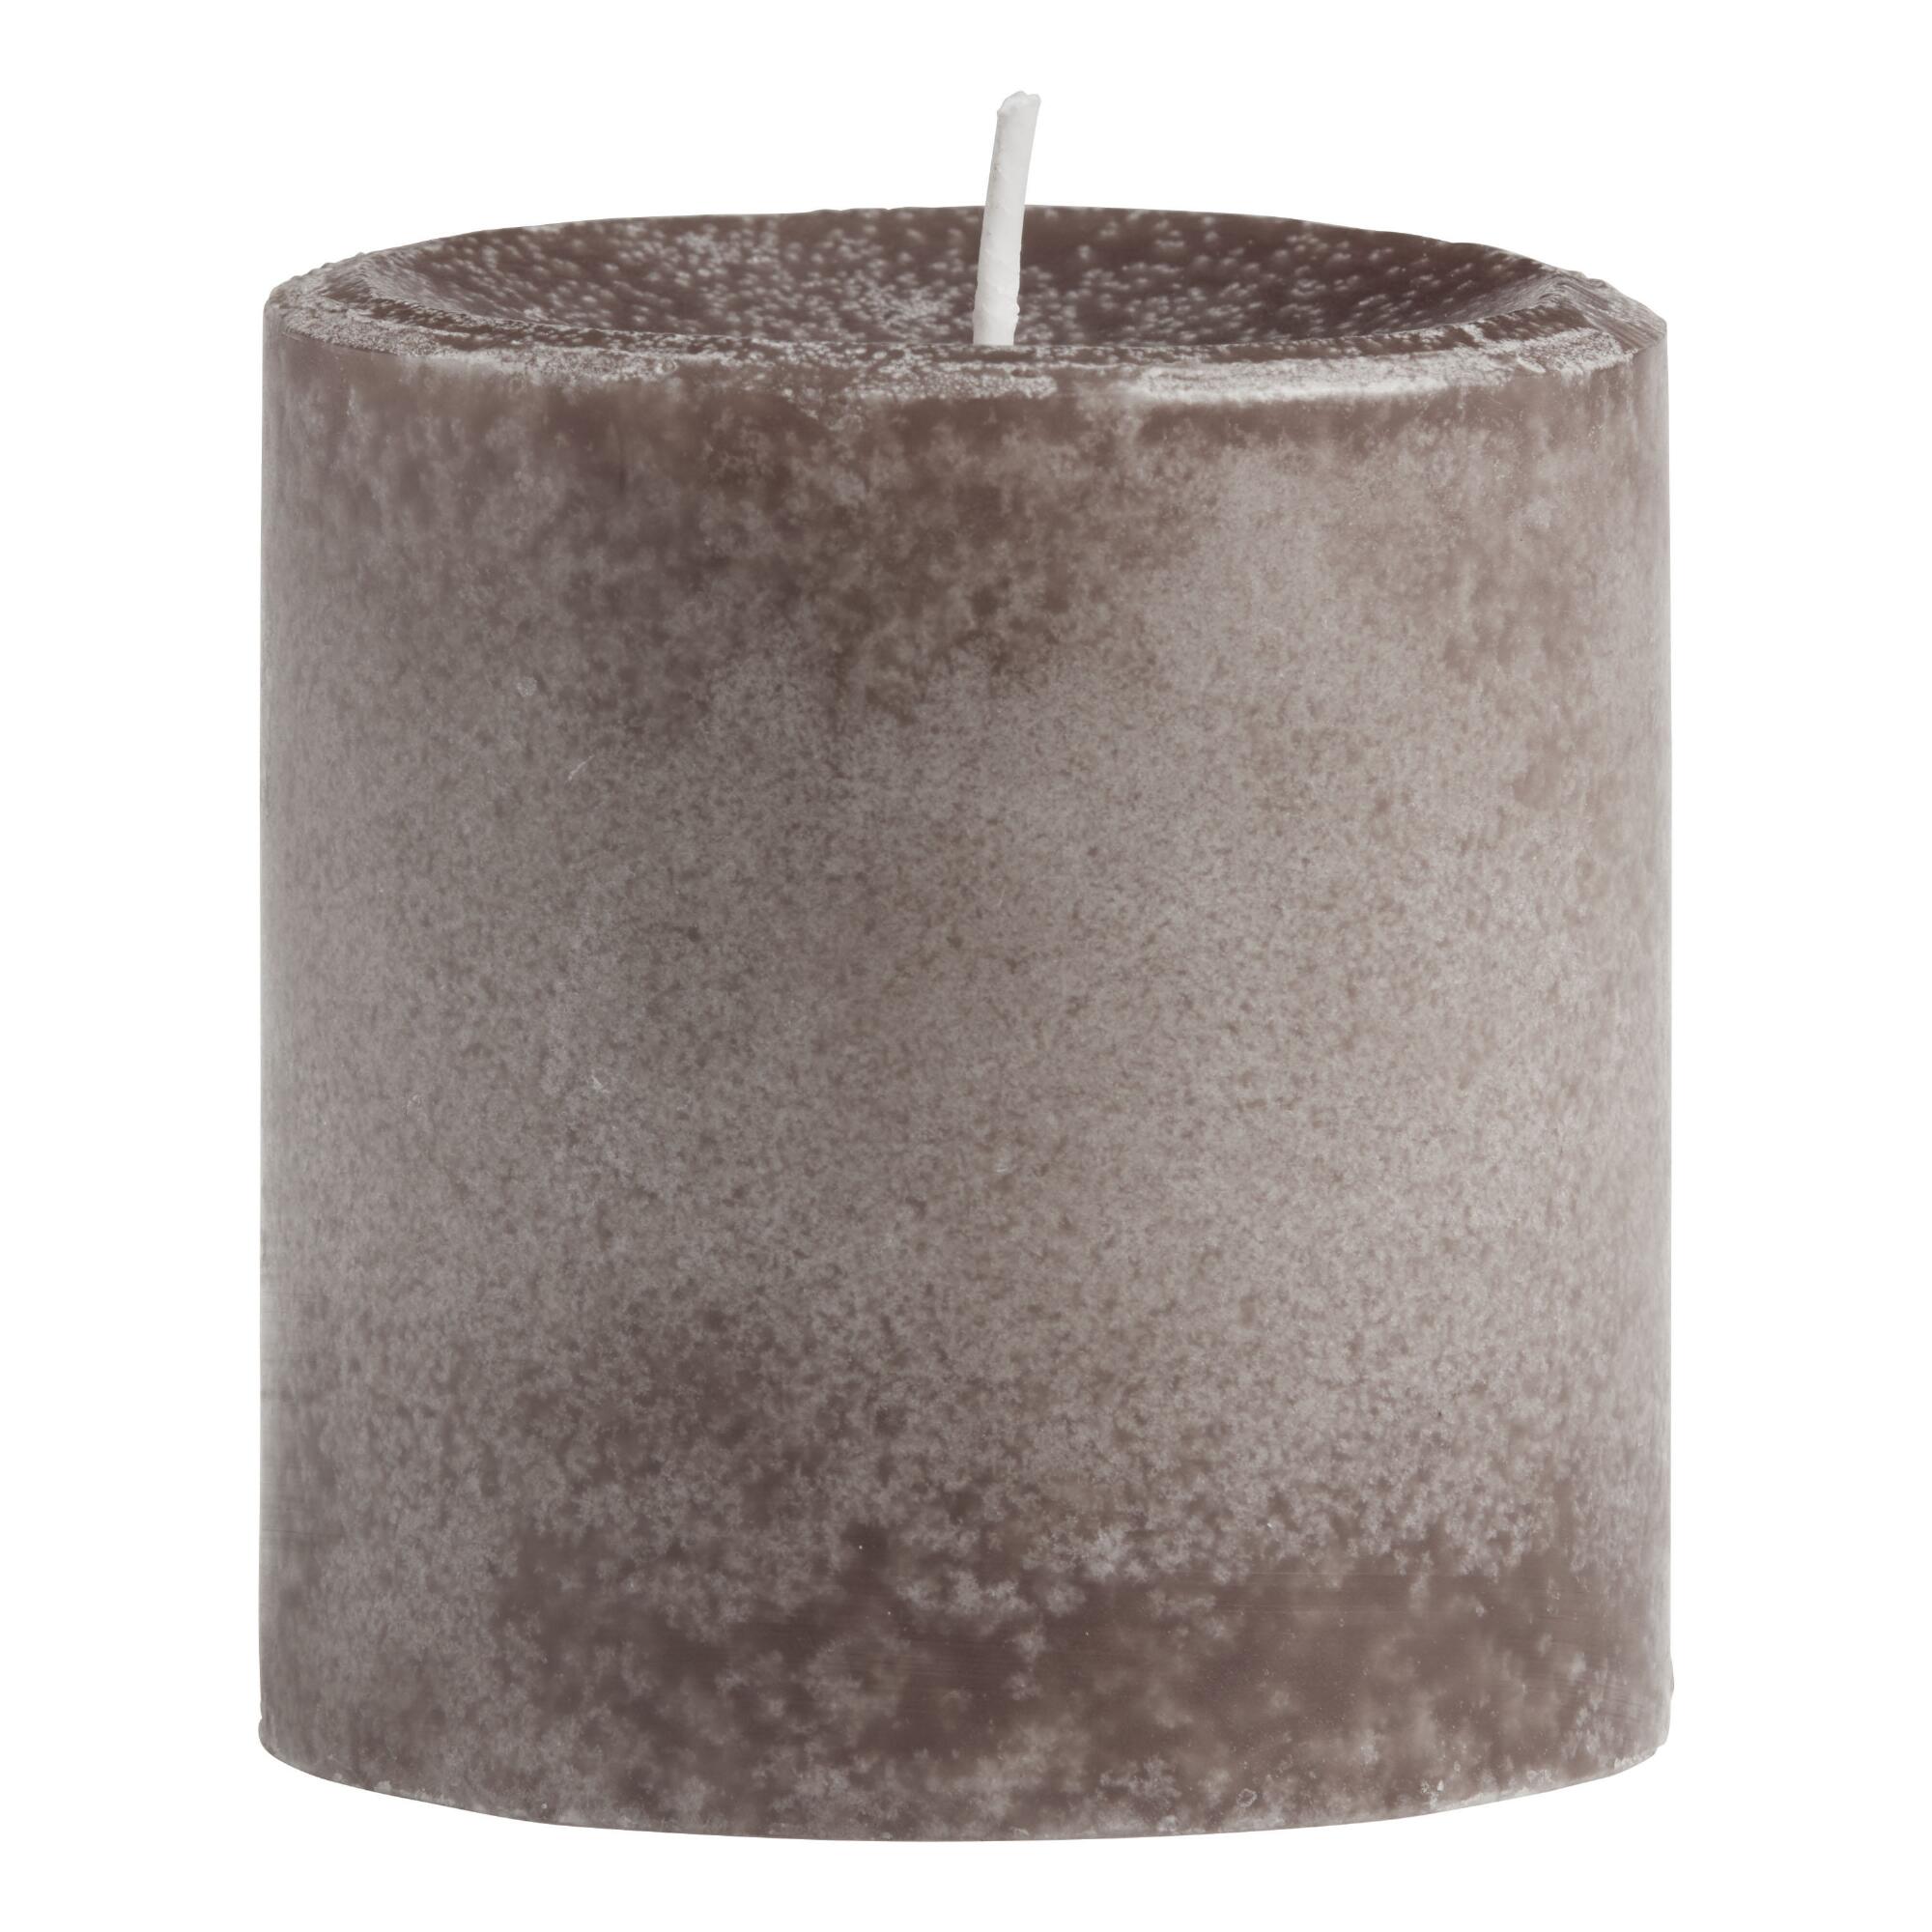 3x3 Bergamot Linen Mottled Pillar Scented Candle: Gray - Scented Wax by World Market